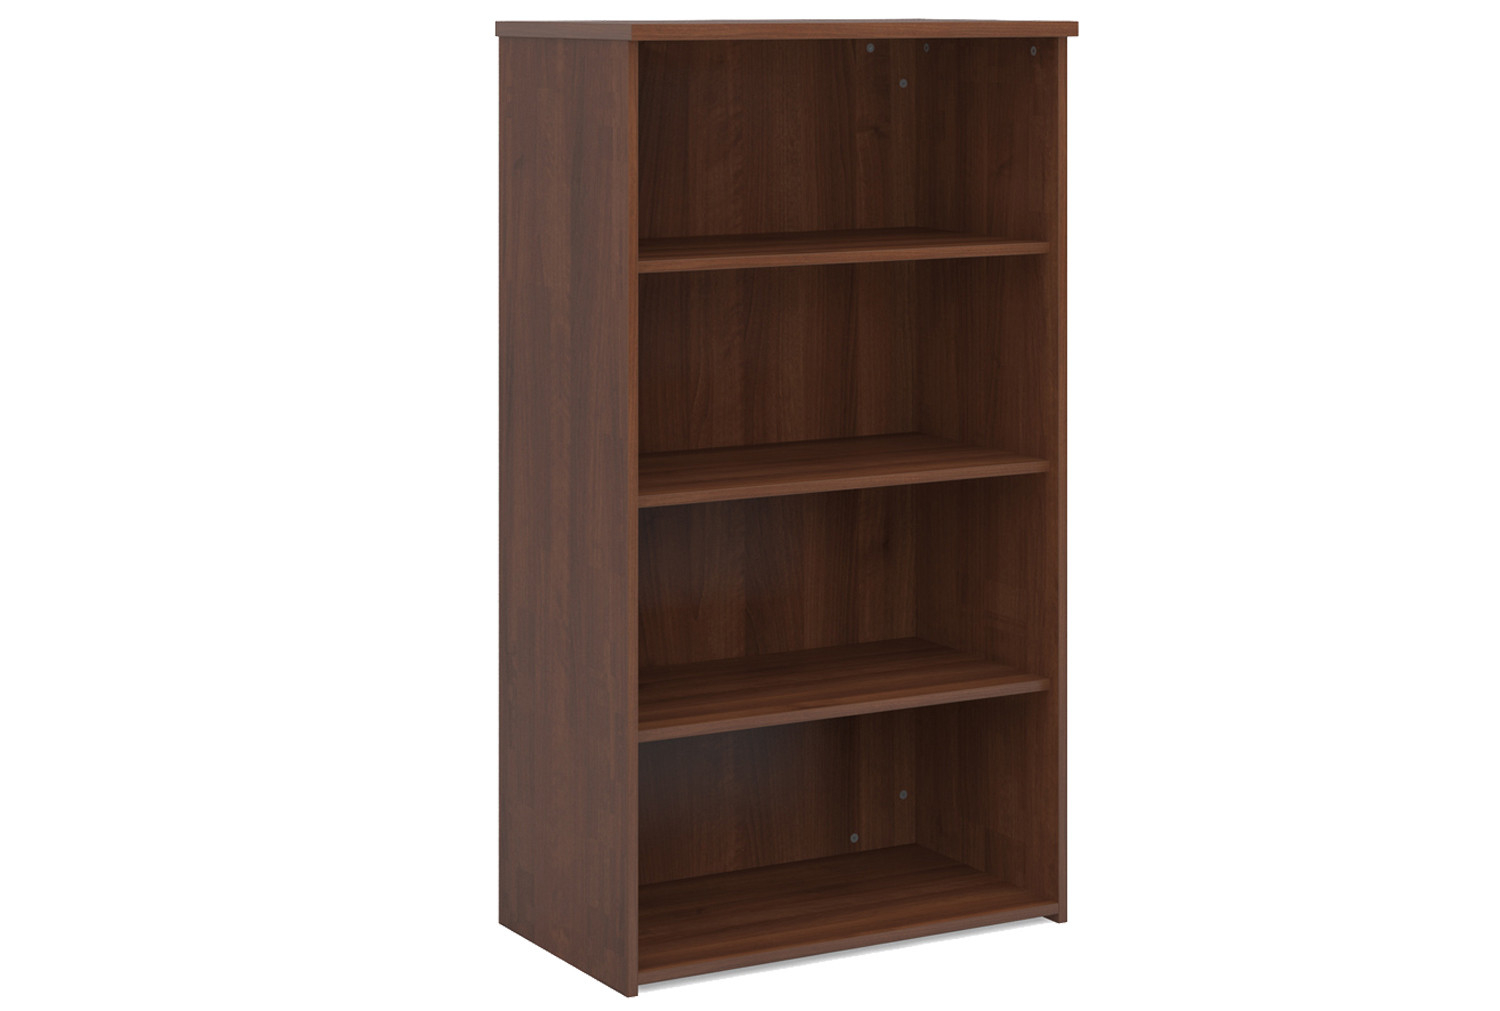 All Walnut Office Bookcases, 3 Shelf - 80wx47dx144h (cm), Express Delivery